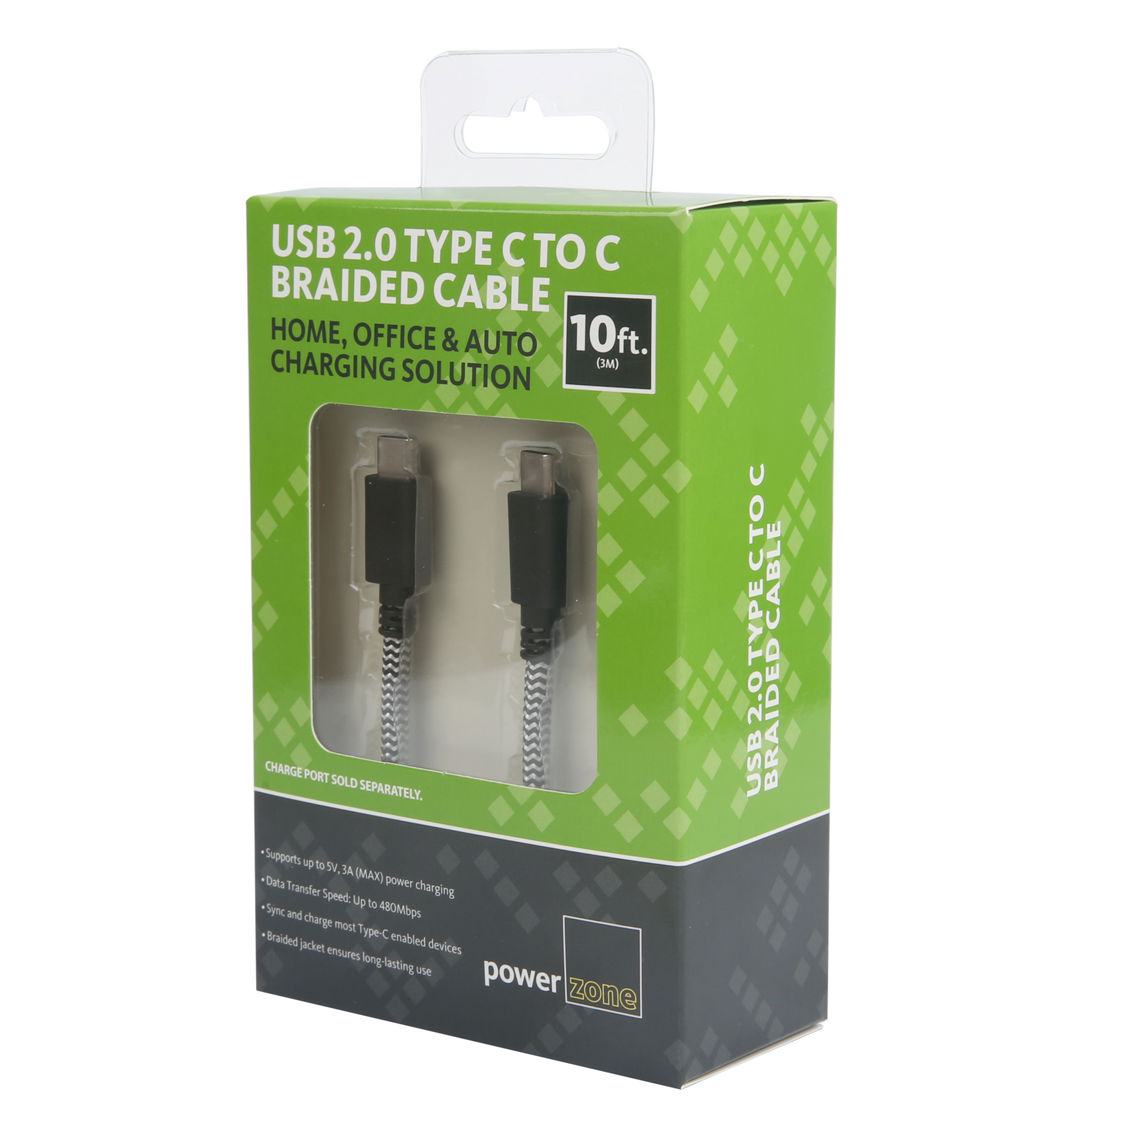 Powerzone USB 2.0 Type C to C 10ft. Braided Cable - Image 5 of 5